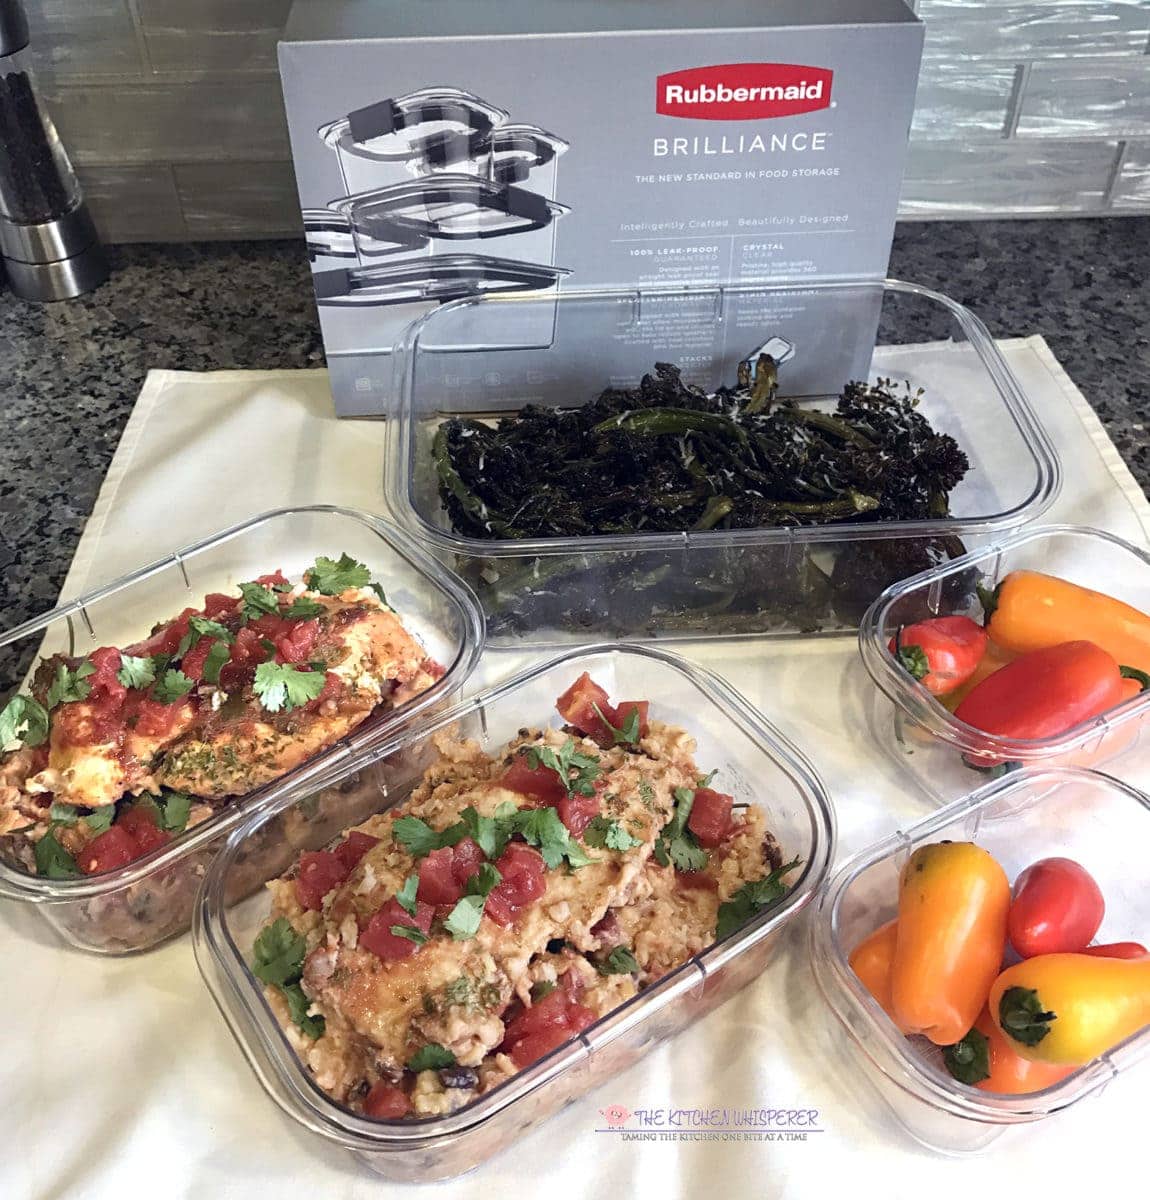 Weekly Meal Prep Made Simple with Rubbermaid® BRILLIANCE™